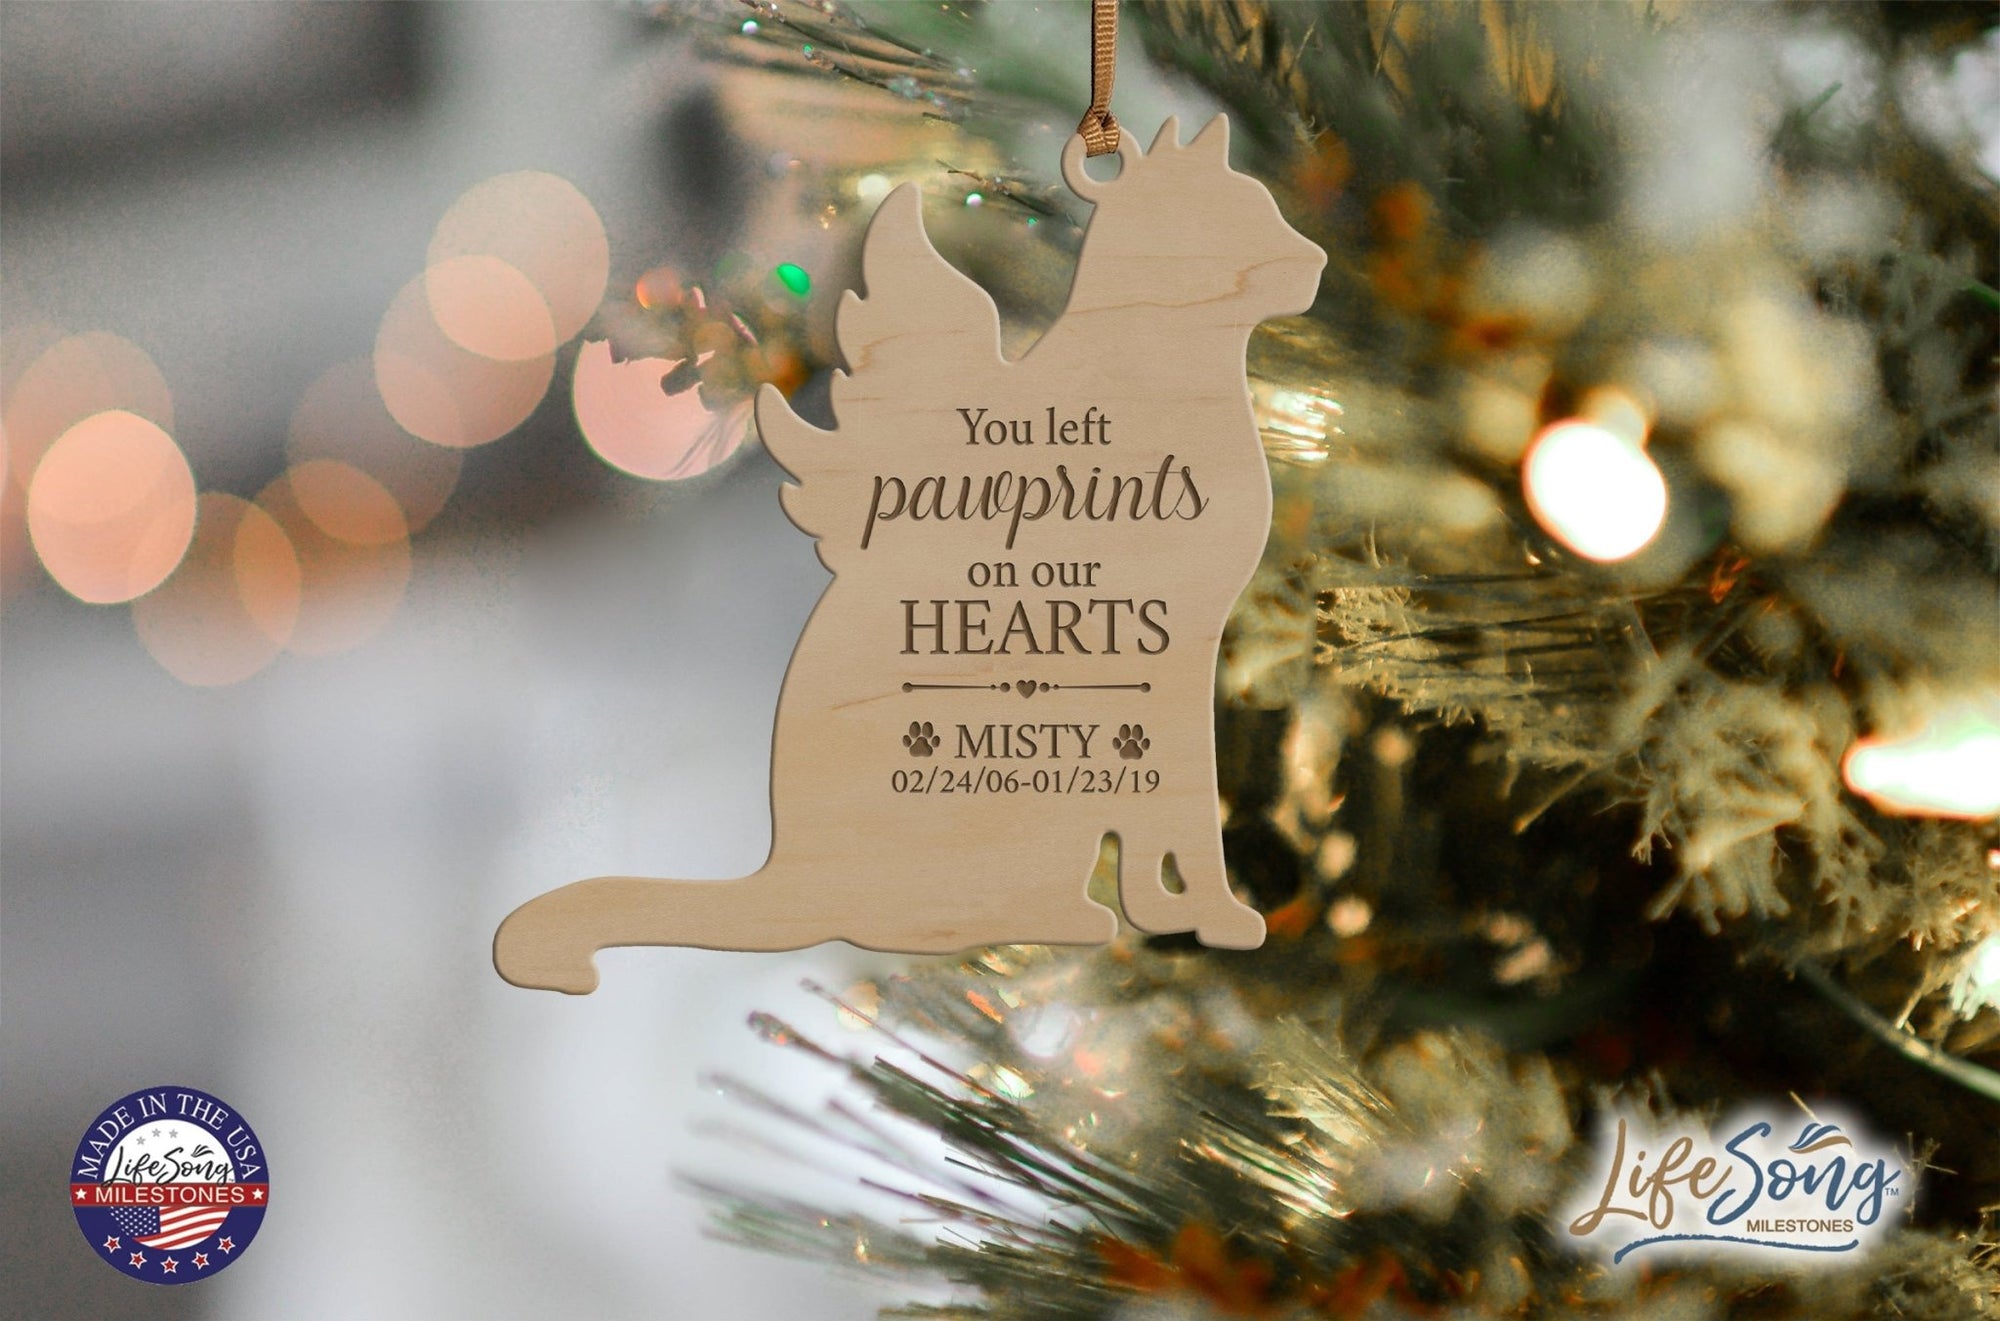 Personalized Engraved Memorial Cat Ornament 4.9375” x 5.375” x 0.125” - You left pawprints (PAWS) - LifeSong Milestones